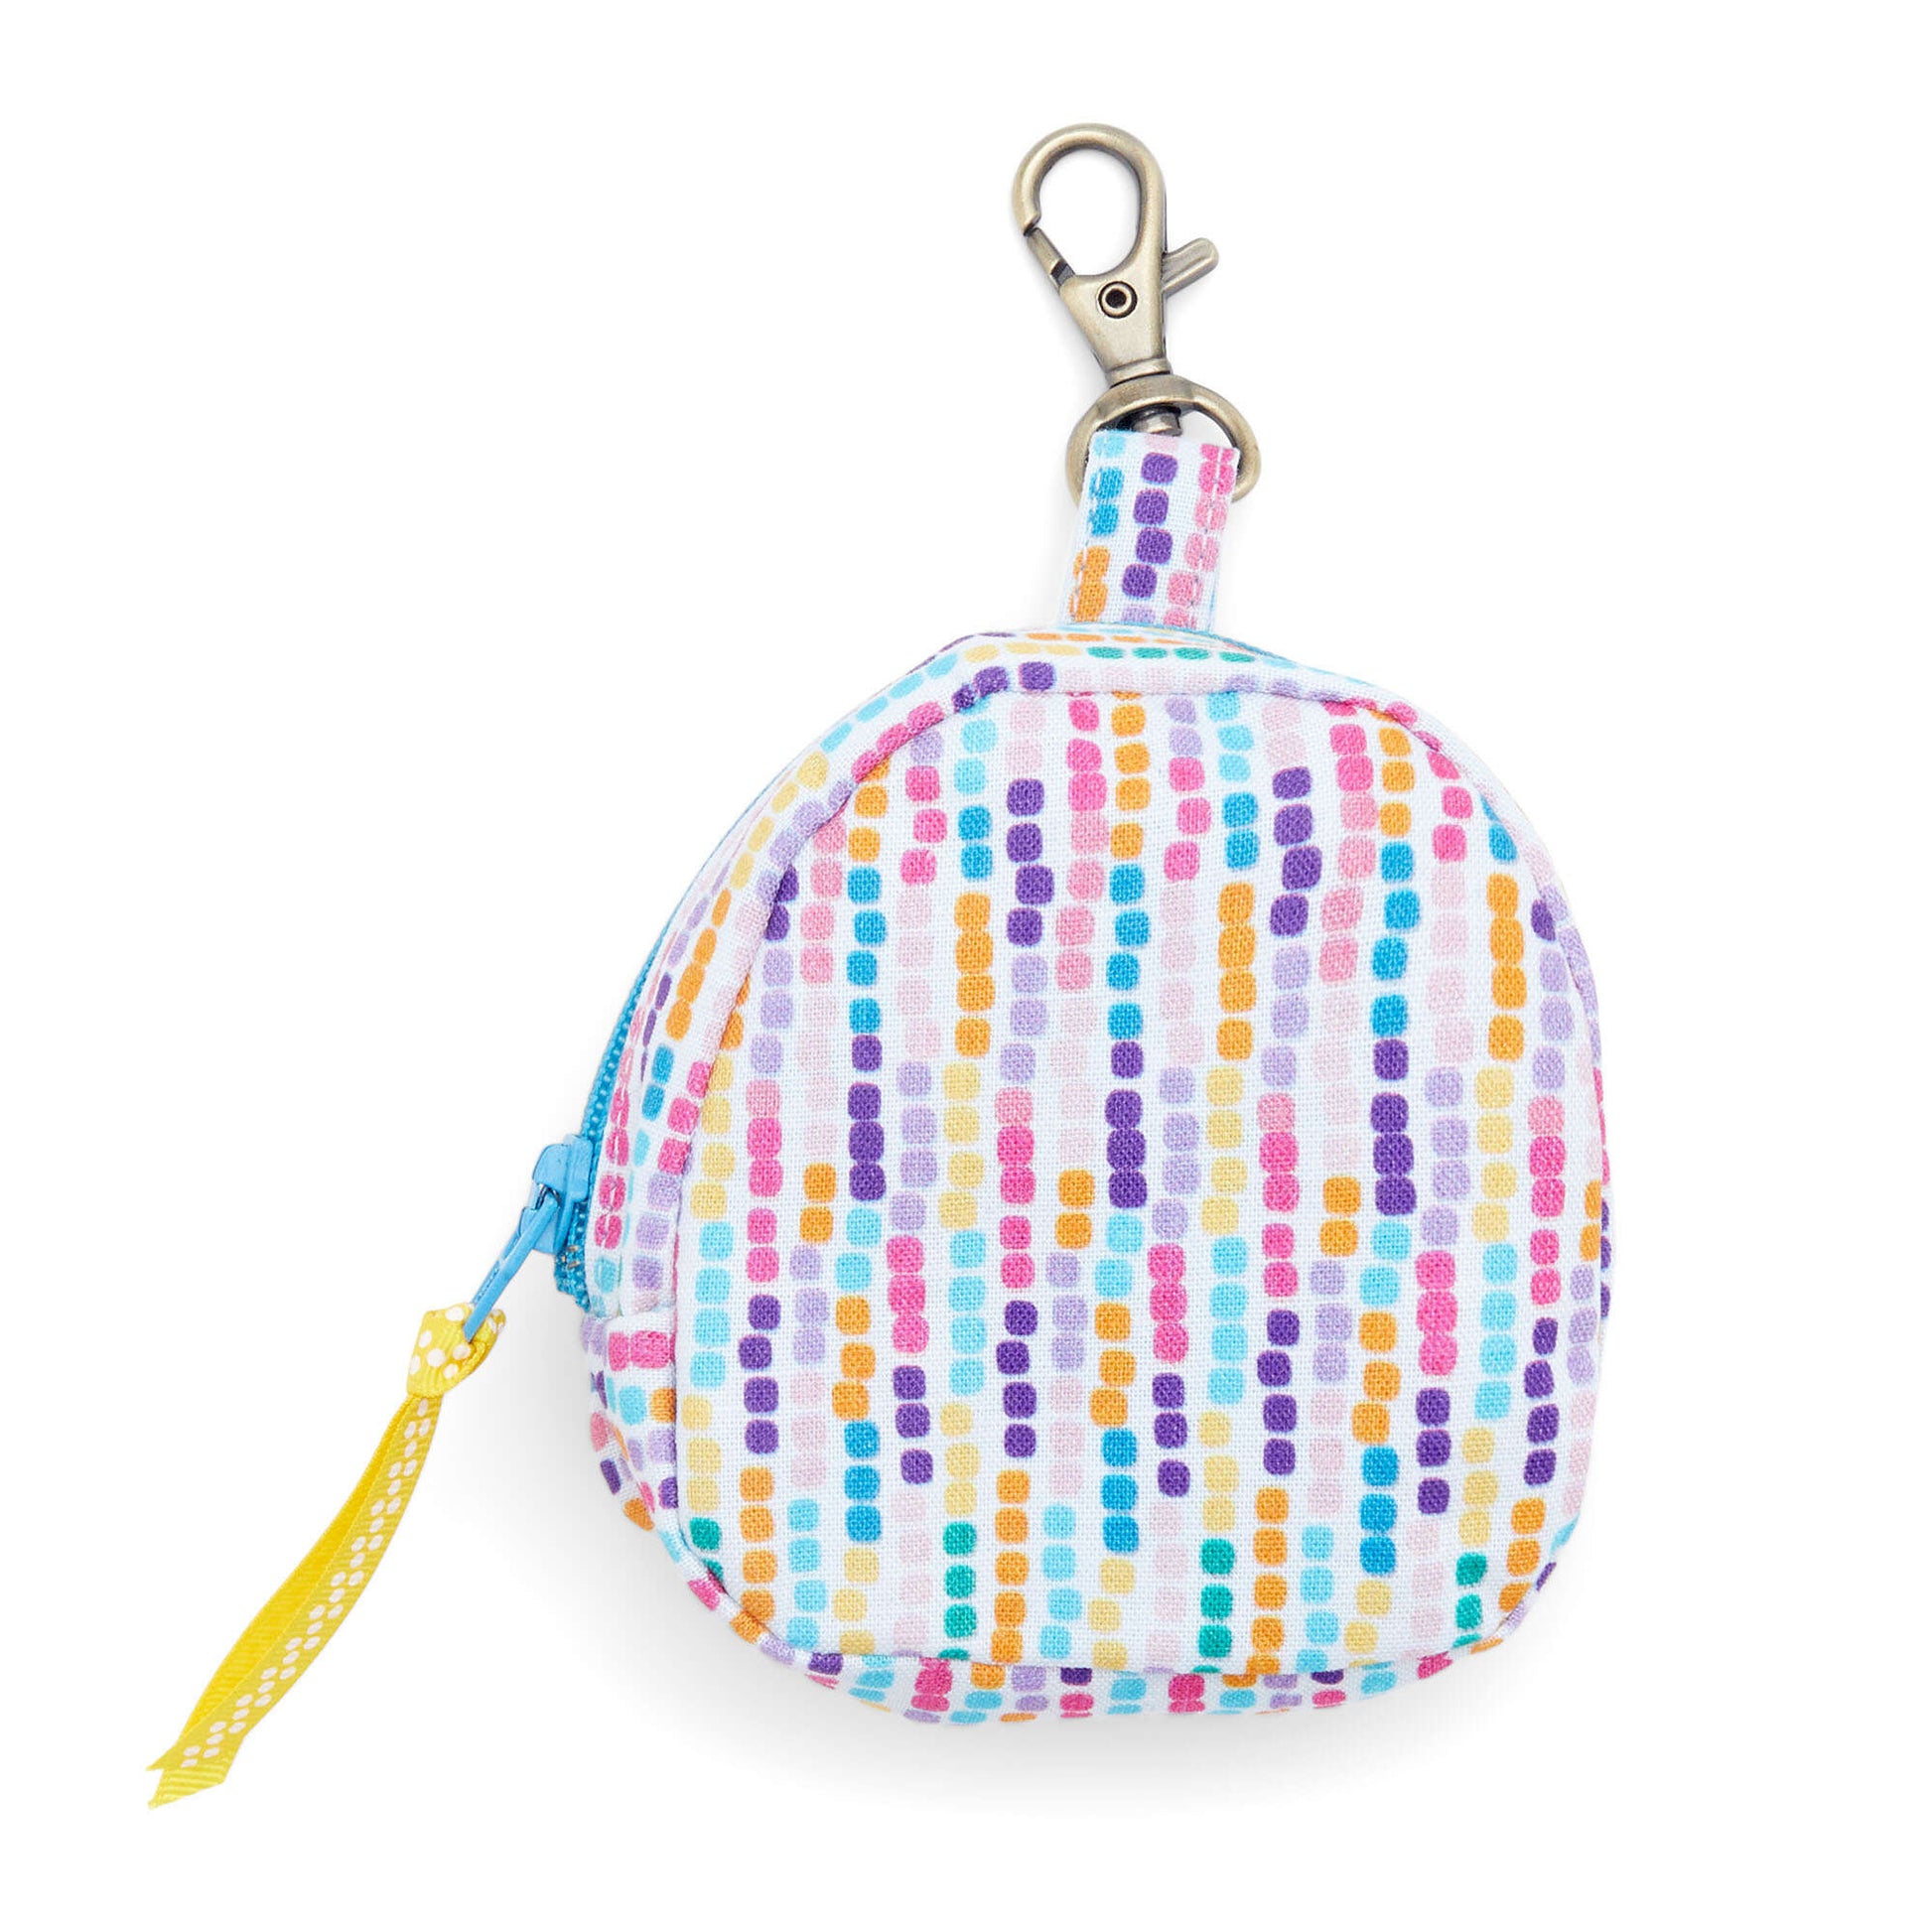 Free Coats & Clark Sewing Coin Purse Pattern